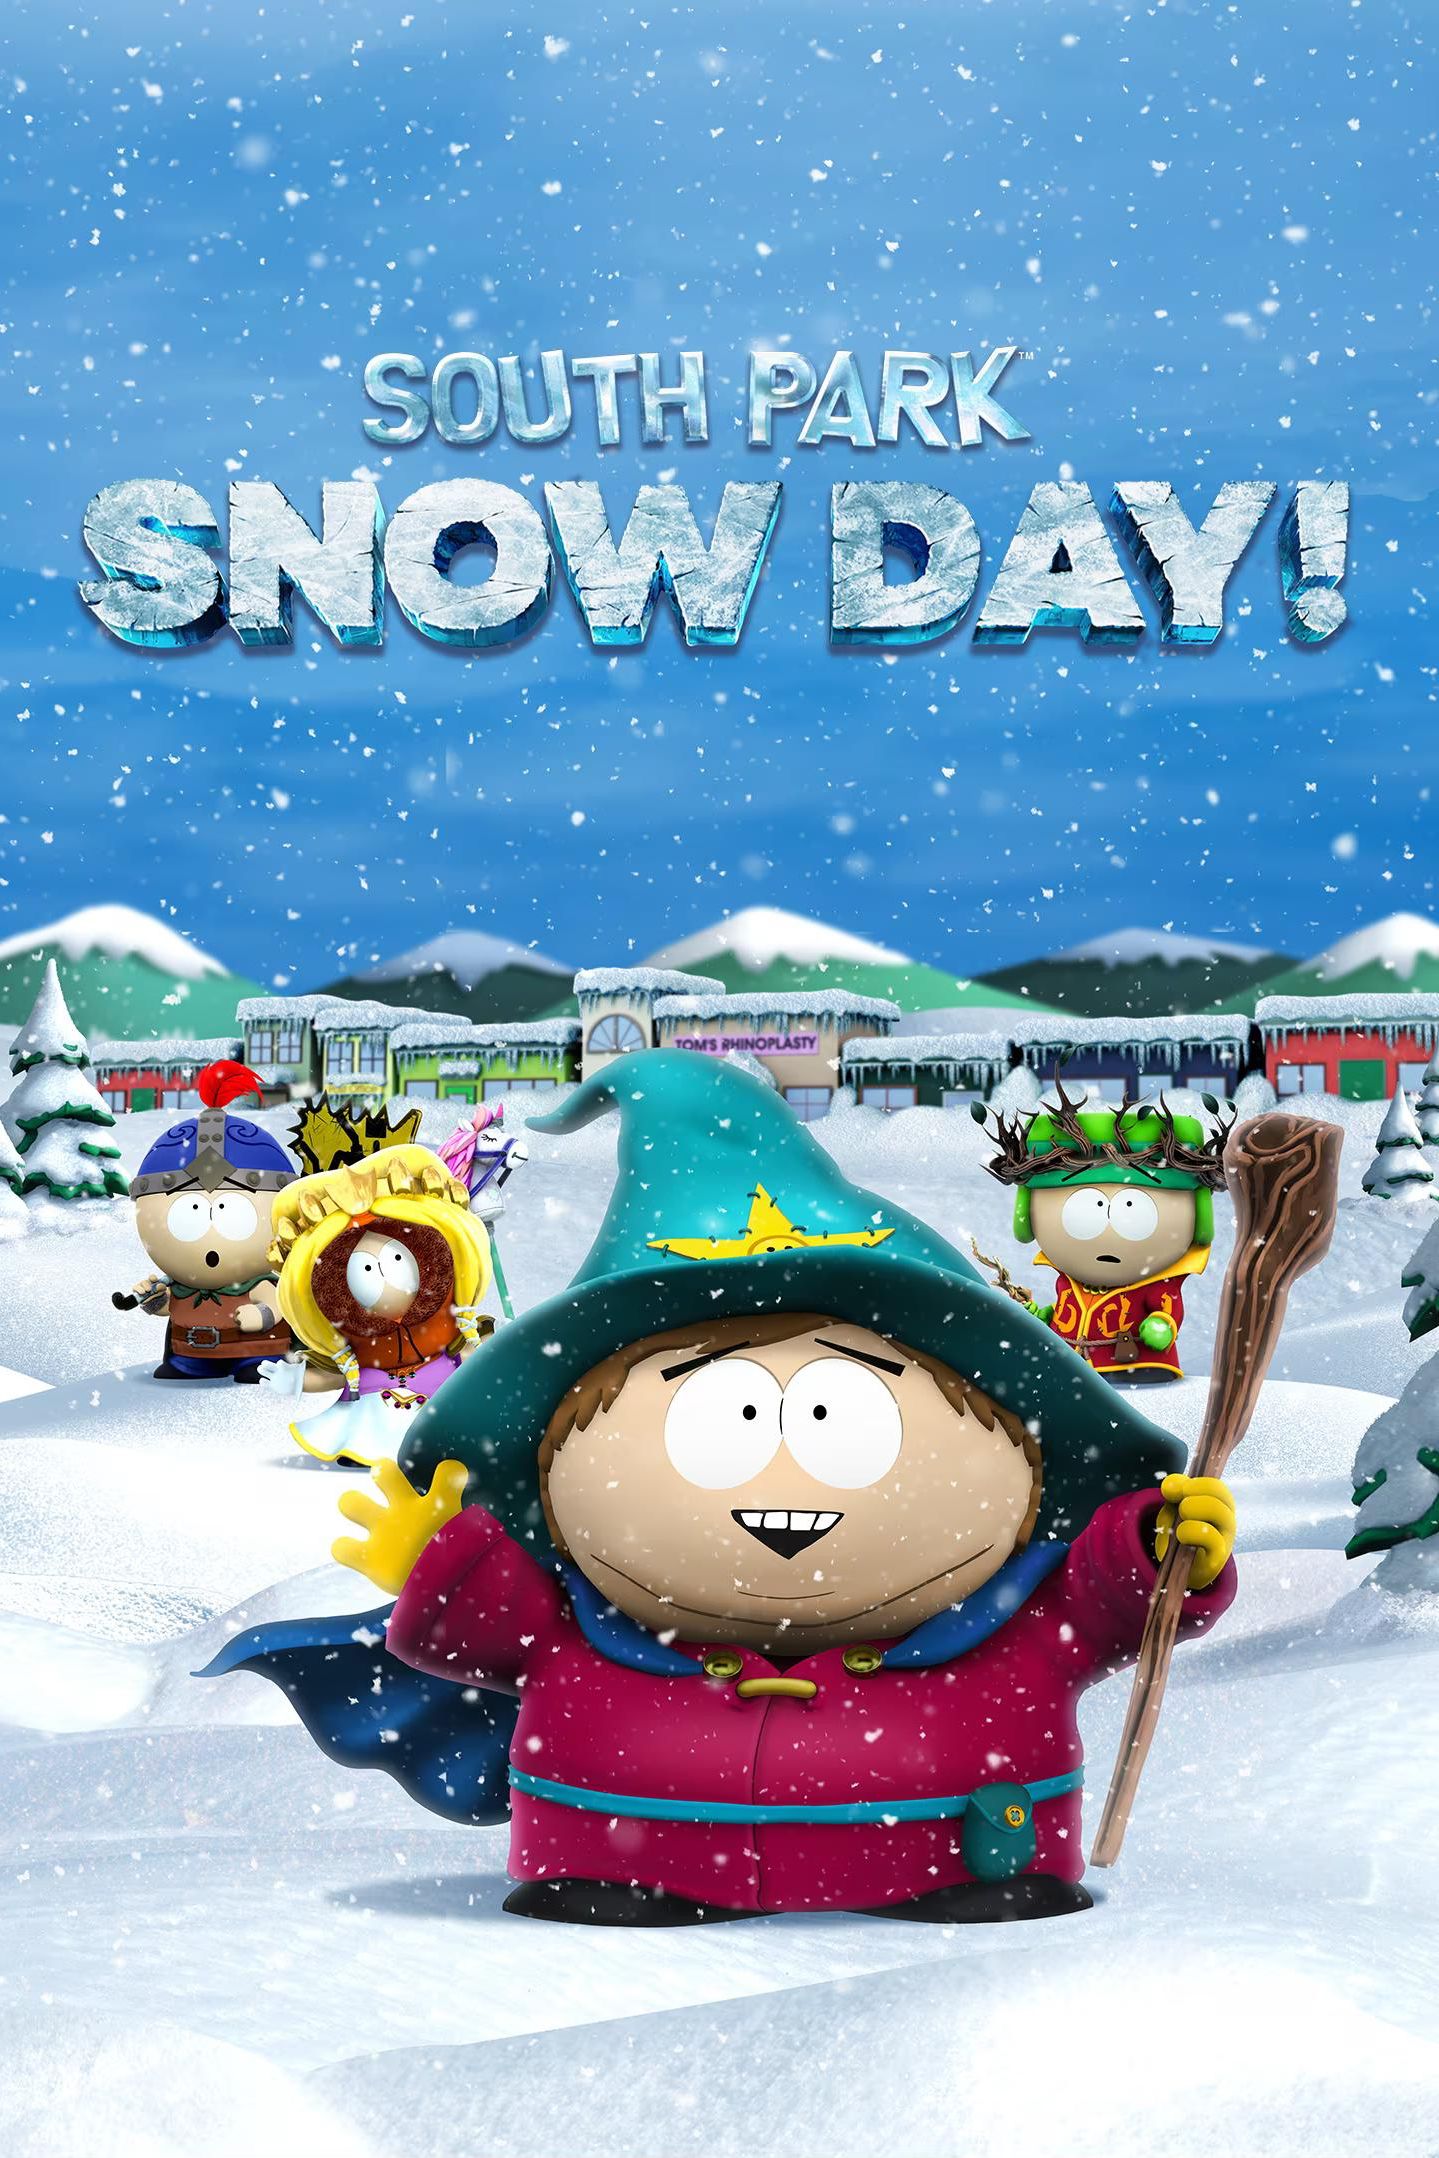 South Park Snow Day Game Poster